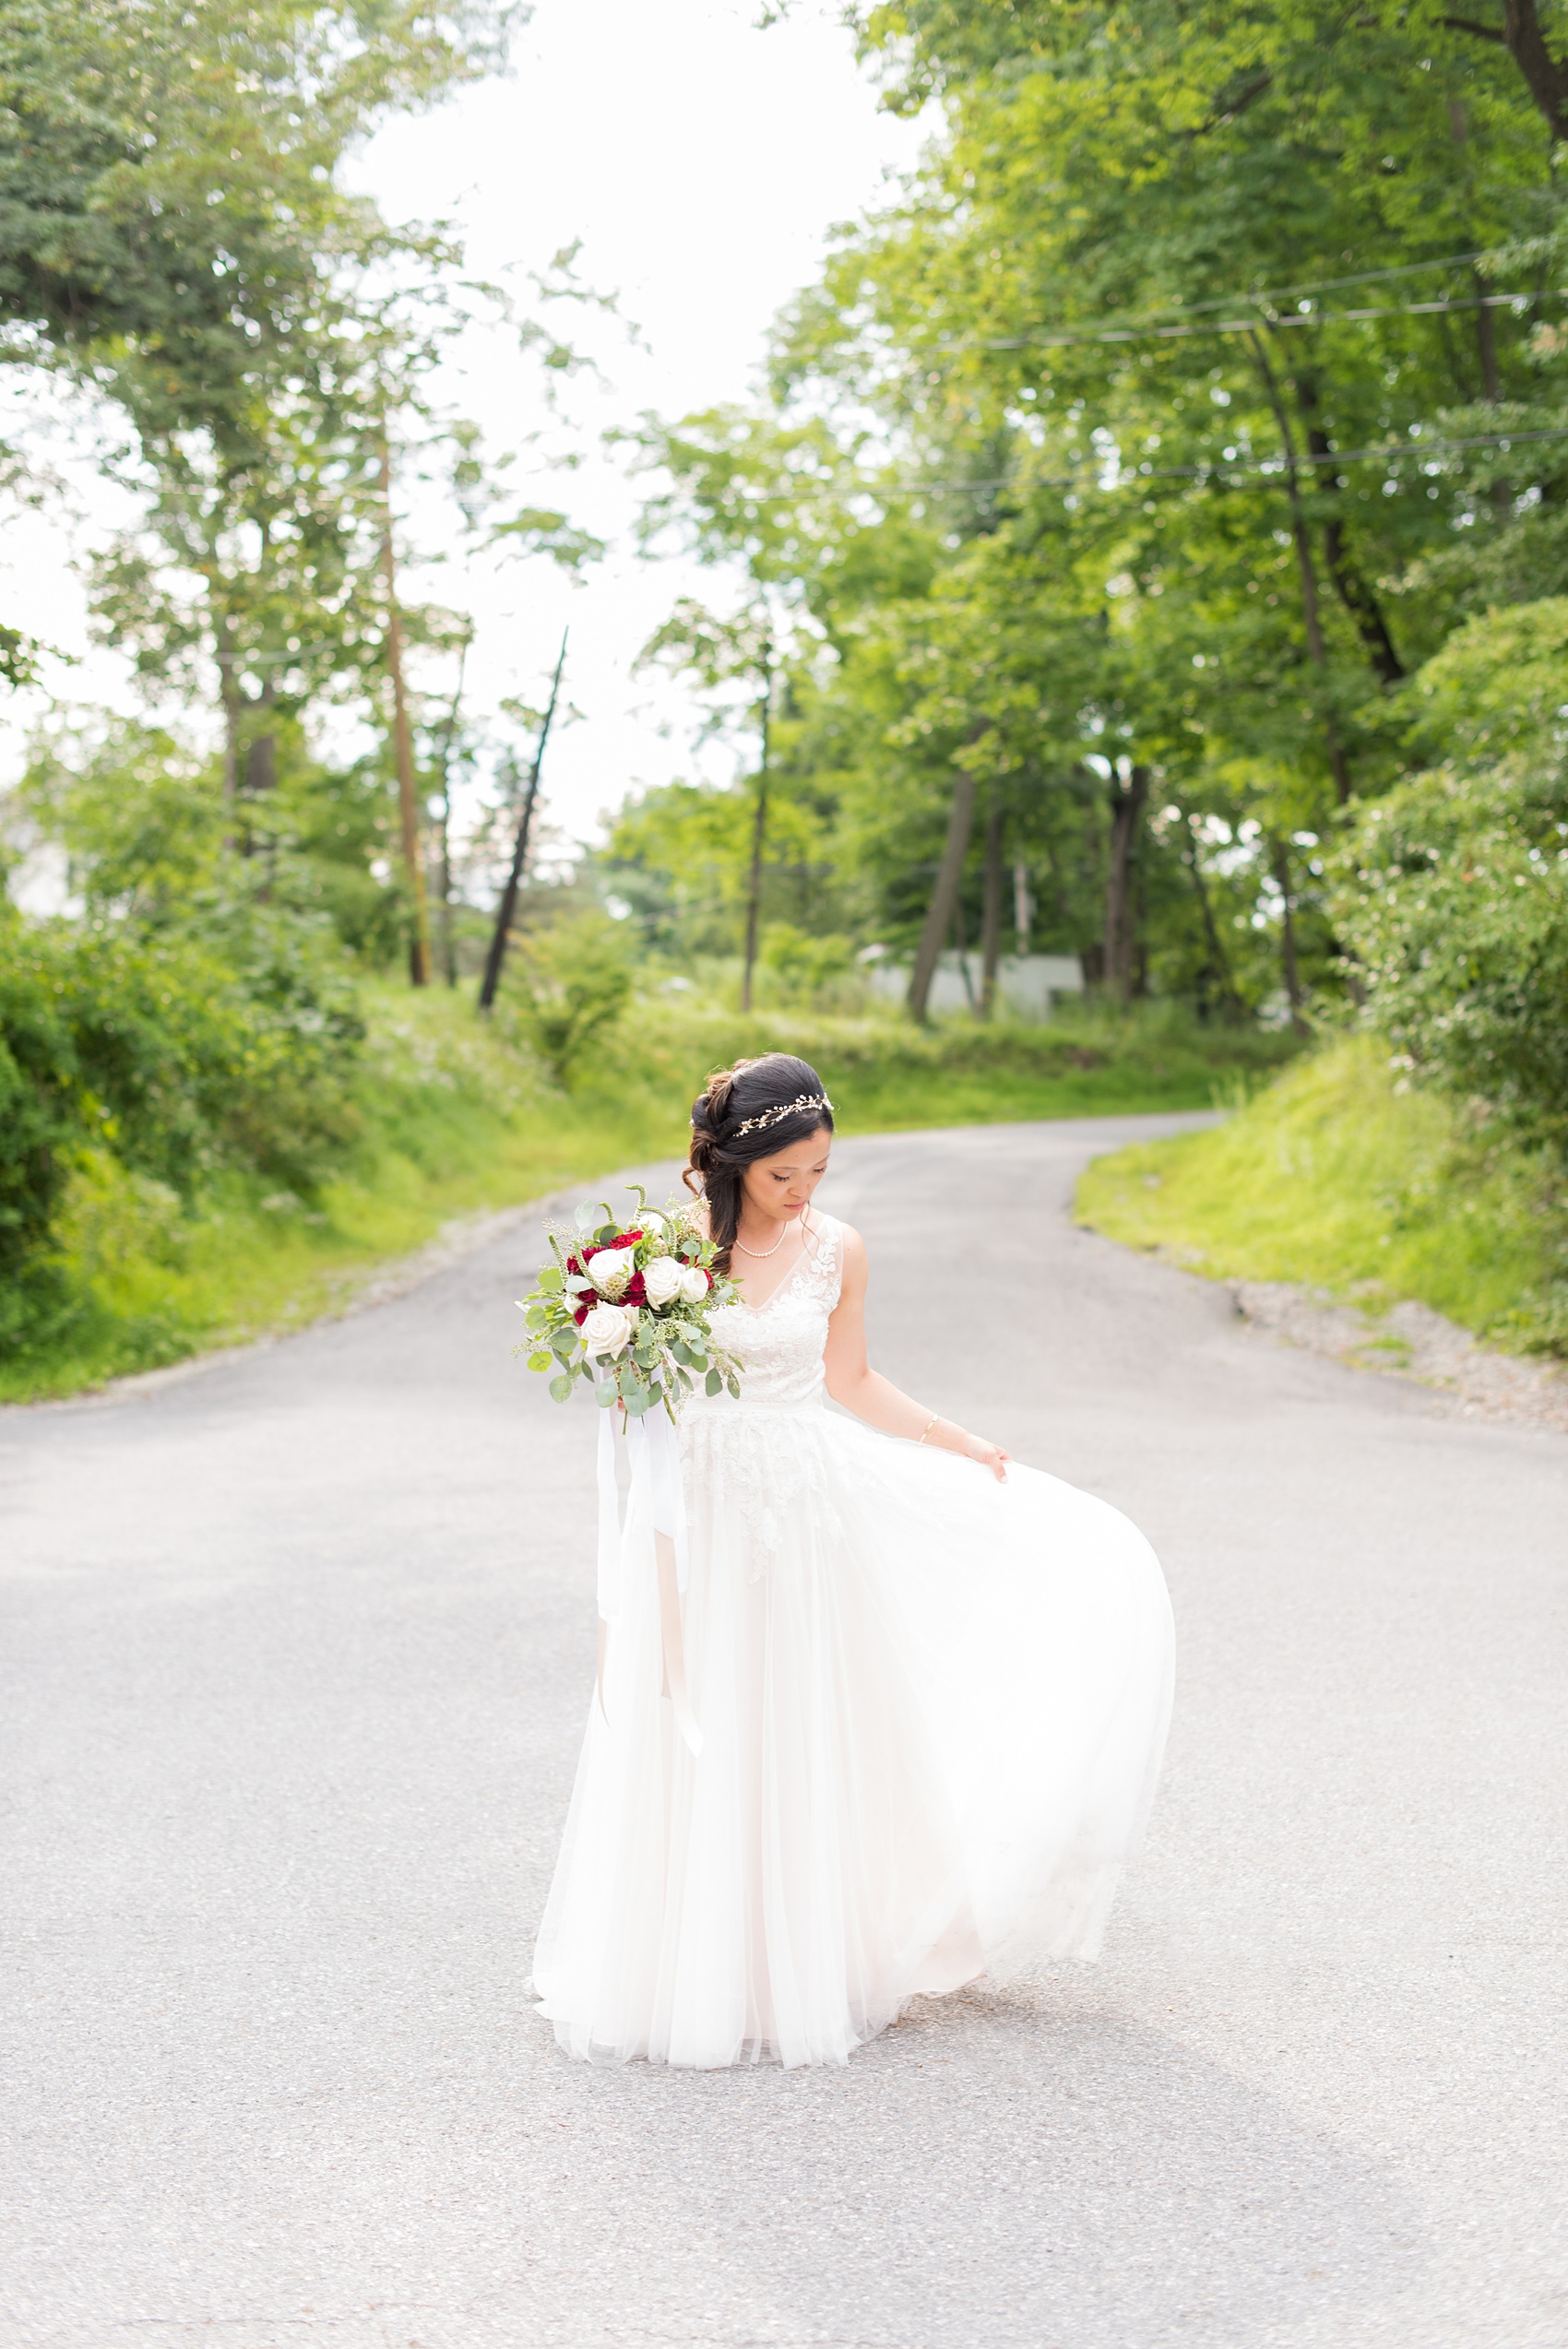 Wedding photos at Crabtree's Kittle House in Chappaqua, New York by Mikkel Paige Photography. The bride wore a summery lace and tulle gown from BHLDN for her wedding and held a bouquet with red and white flowers at this historic Westchester County venue very close to NYC. Click through to see more detail photos from this gorgeous day! #mikkelpaige #CrabtreesKittleHouse #WestchesterWeddingVenues #WestchesterWedding #summerwedding #weddingdetails #bride #weddingdetails #BHLDN #laceandtullegown #summerweddingdress #redandwhitebouquet